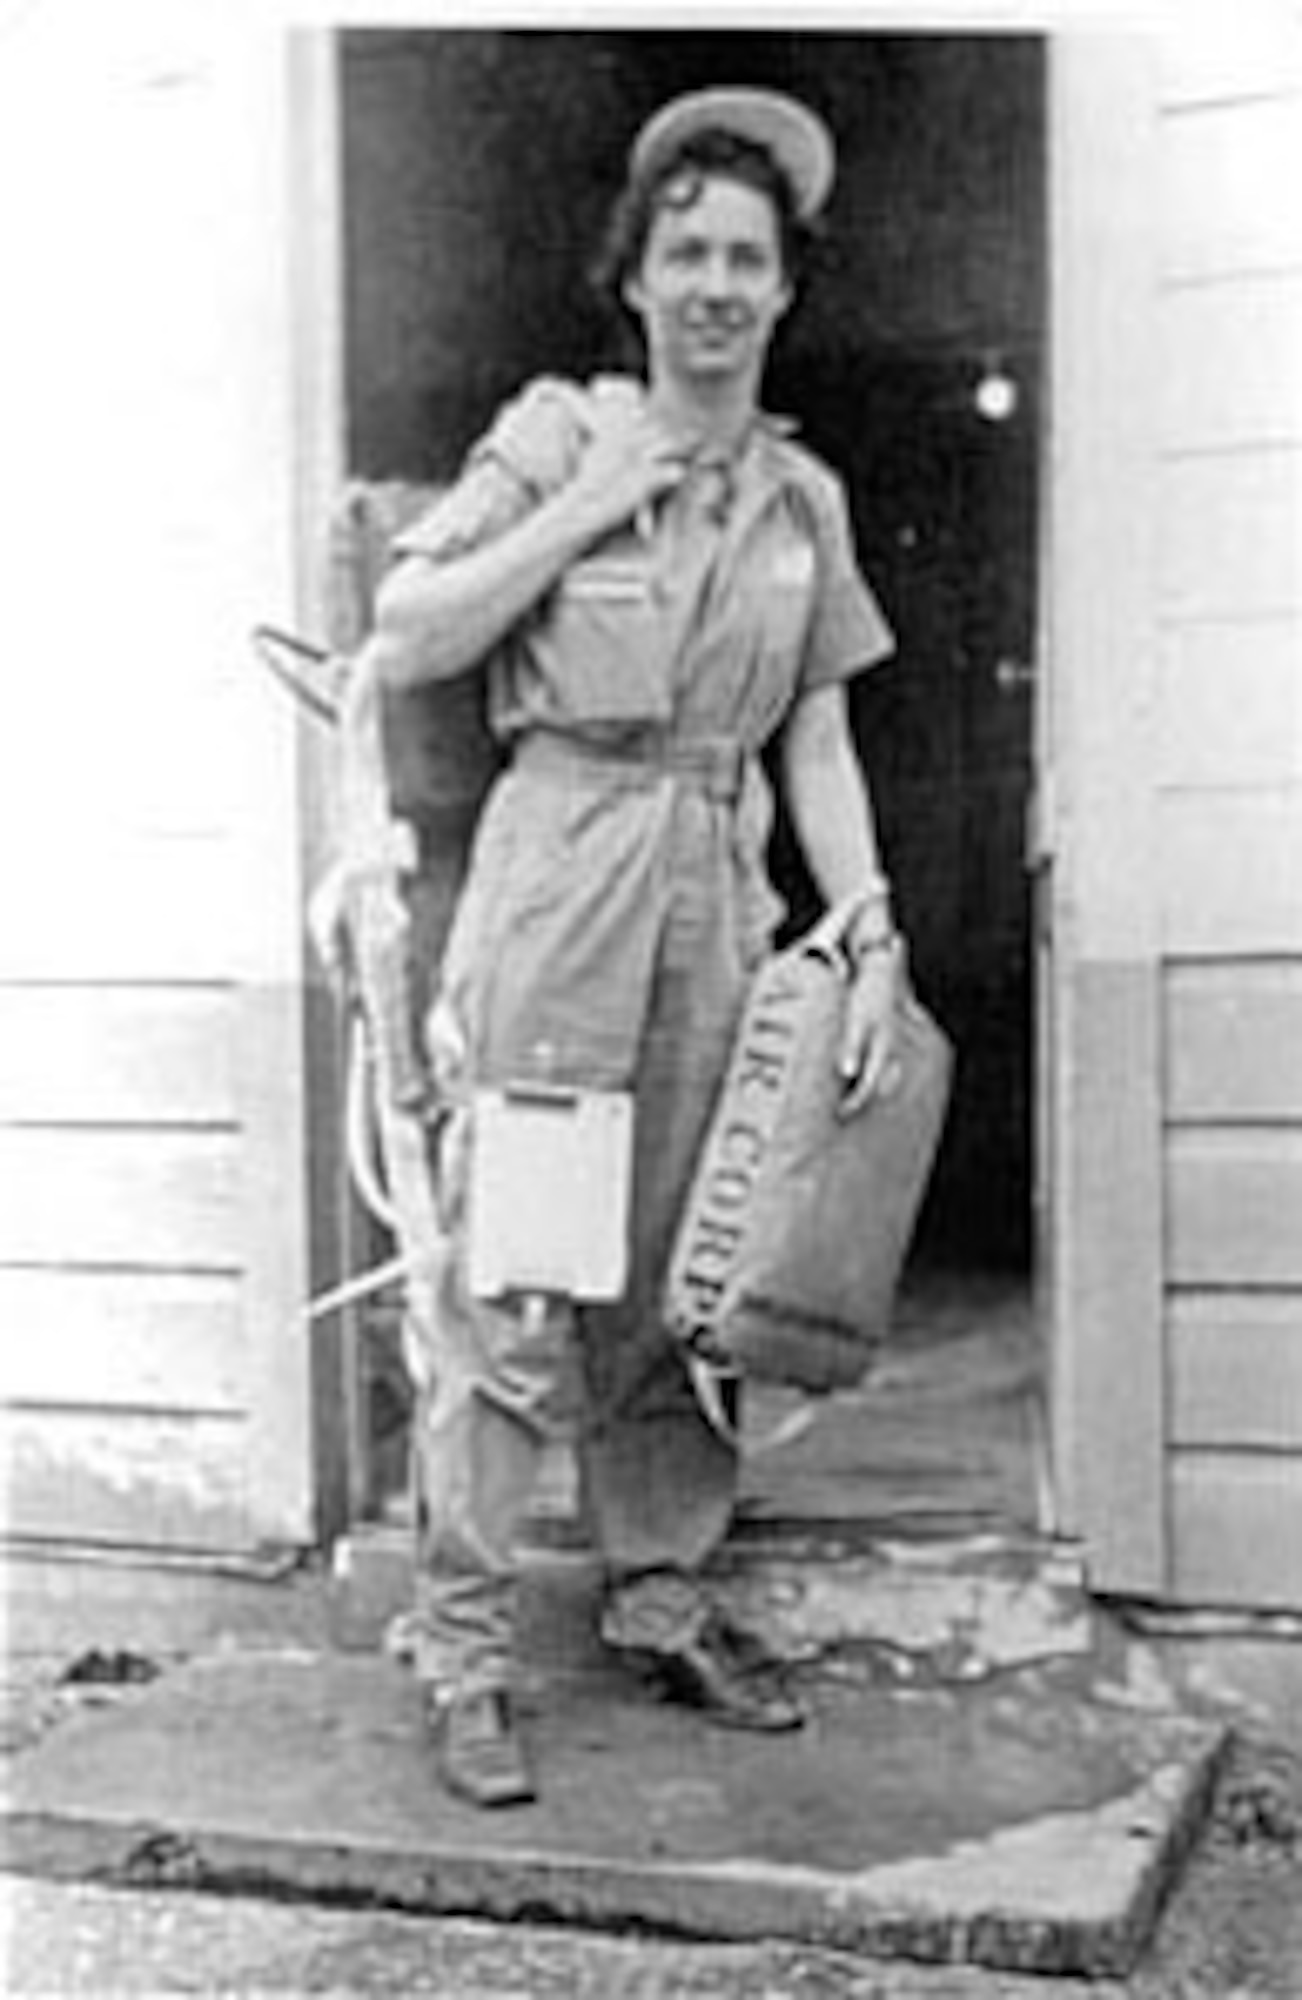 WASP Nadine Canfield (Nagle) wears flight coveralls and carries a parachute and seat cushion. (U.S. Air Force photo)